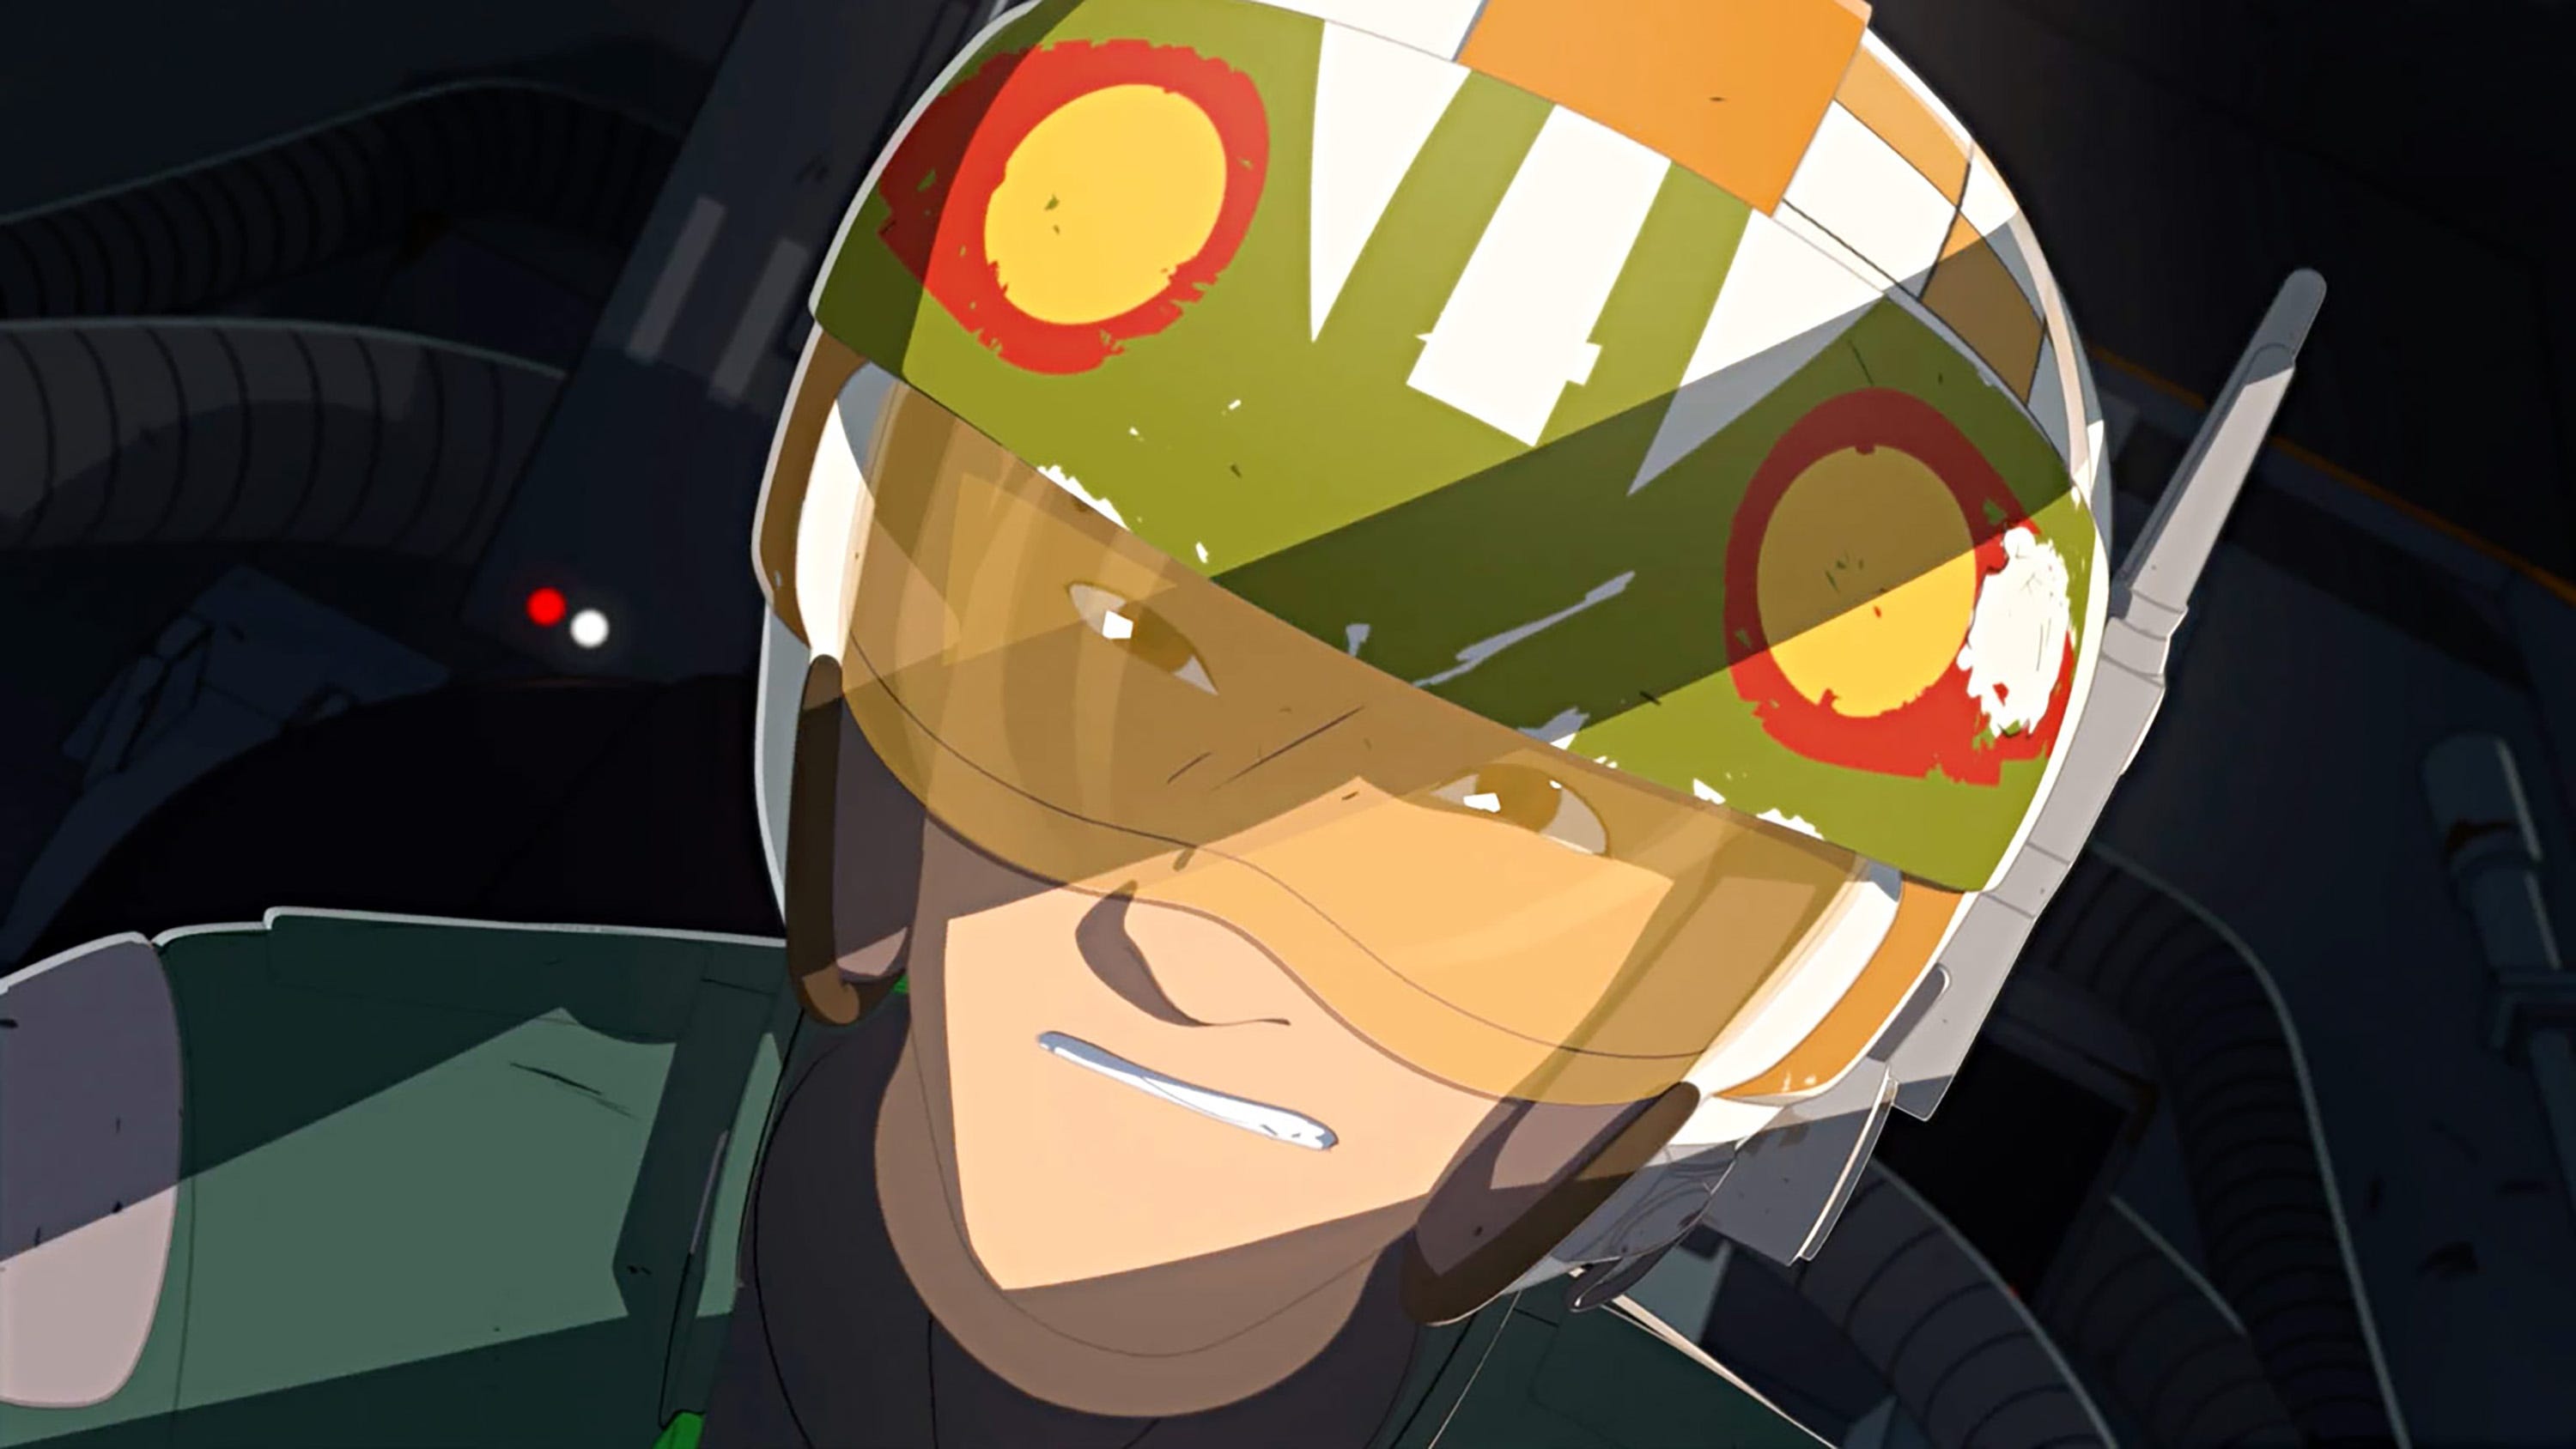 Kazuda Xiono (voiced by Christopher Sean) is a young Resistance pilot sent undercover to spy on the first order in the animated series "Star Wars Resistance."